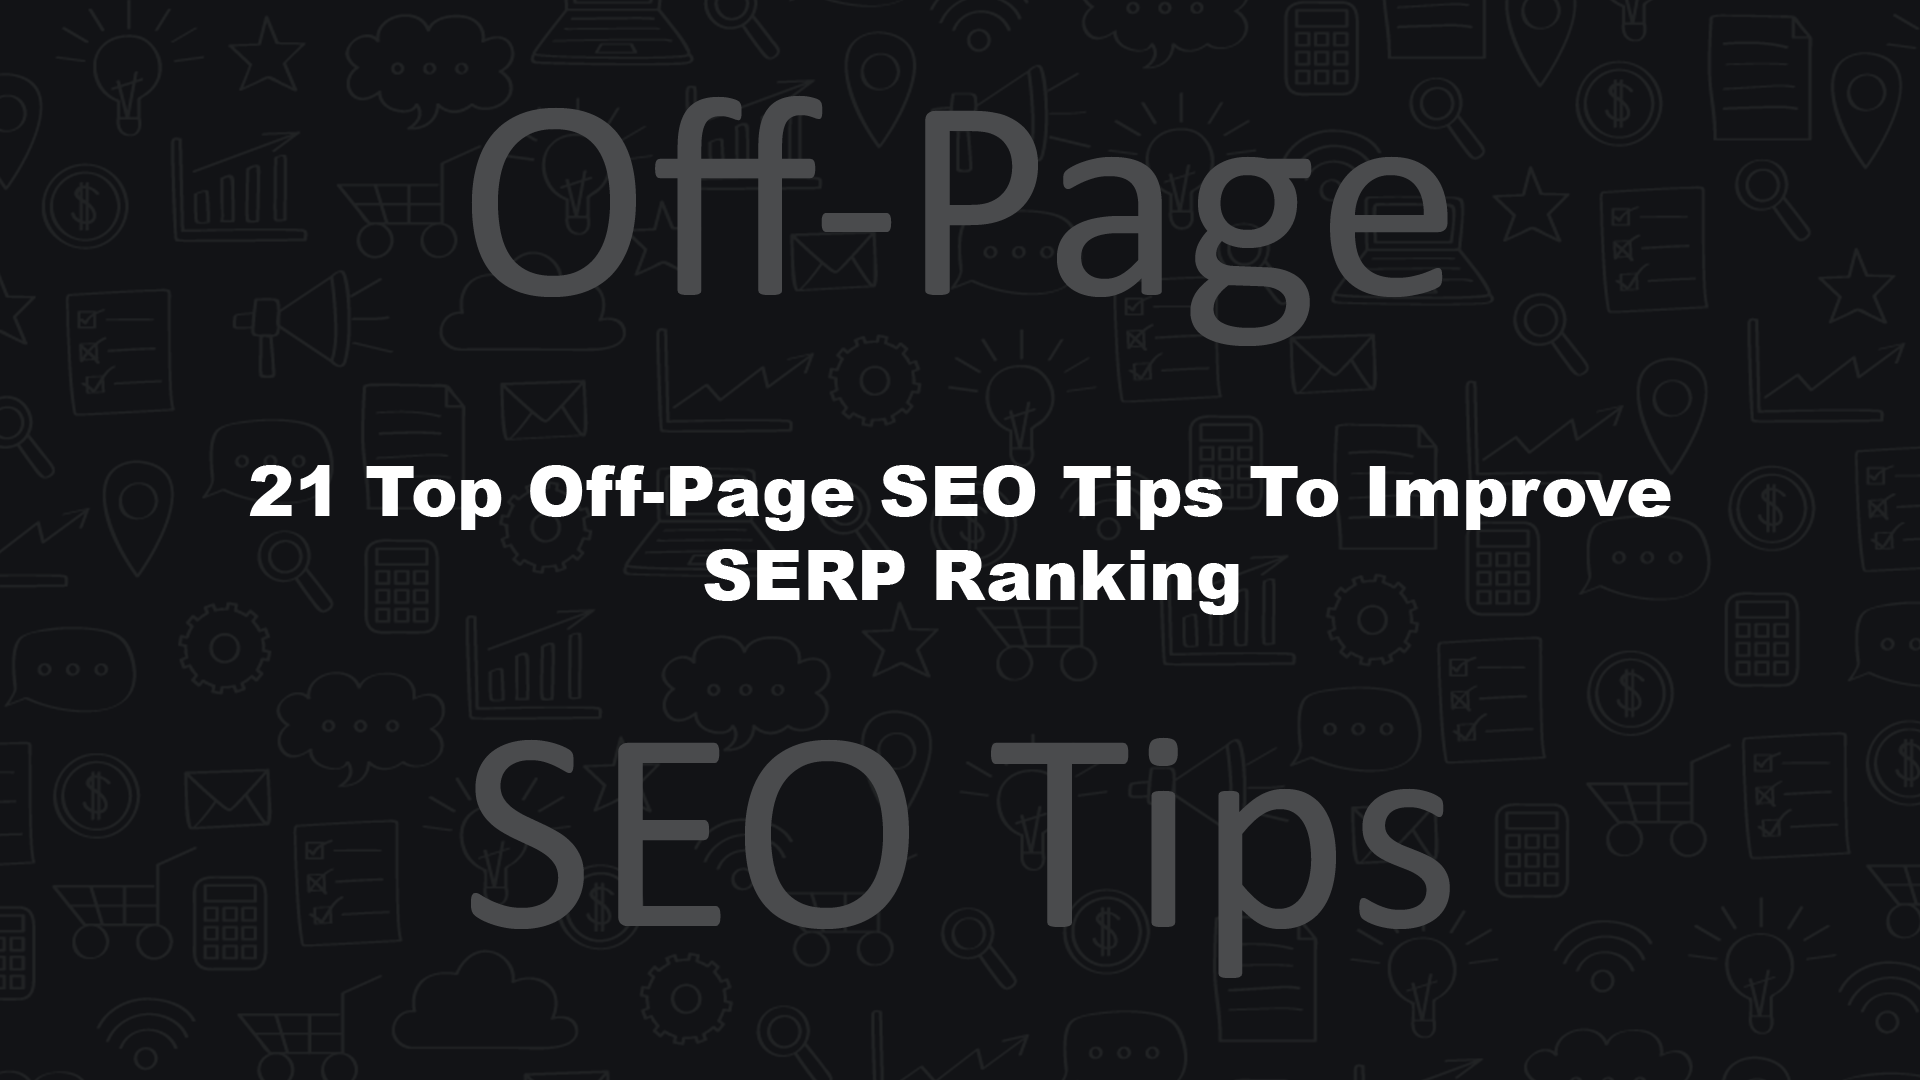 Top Off-Page SEO Tips to Improve SERP Ranking